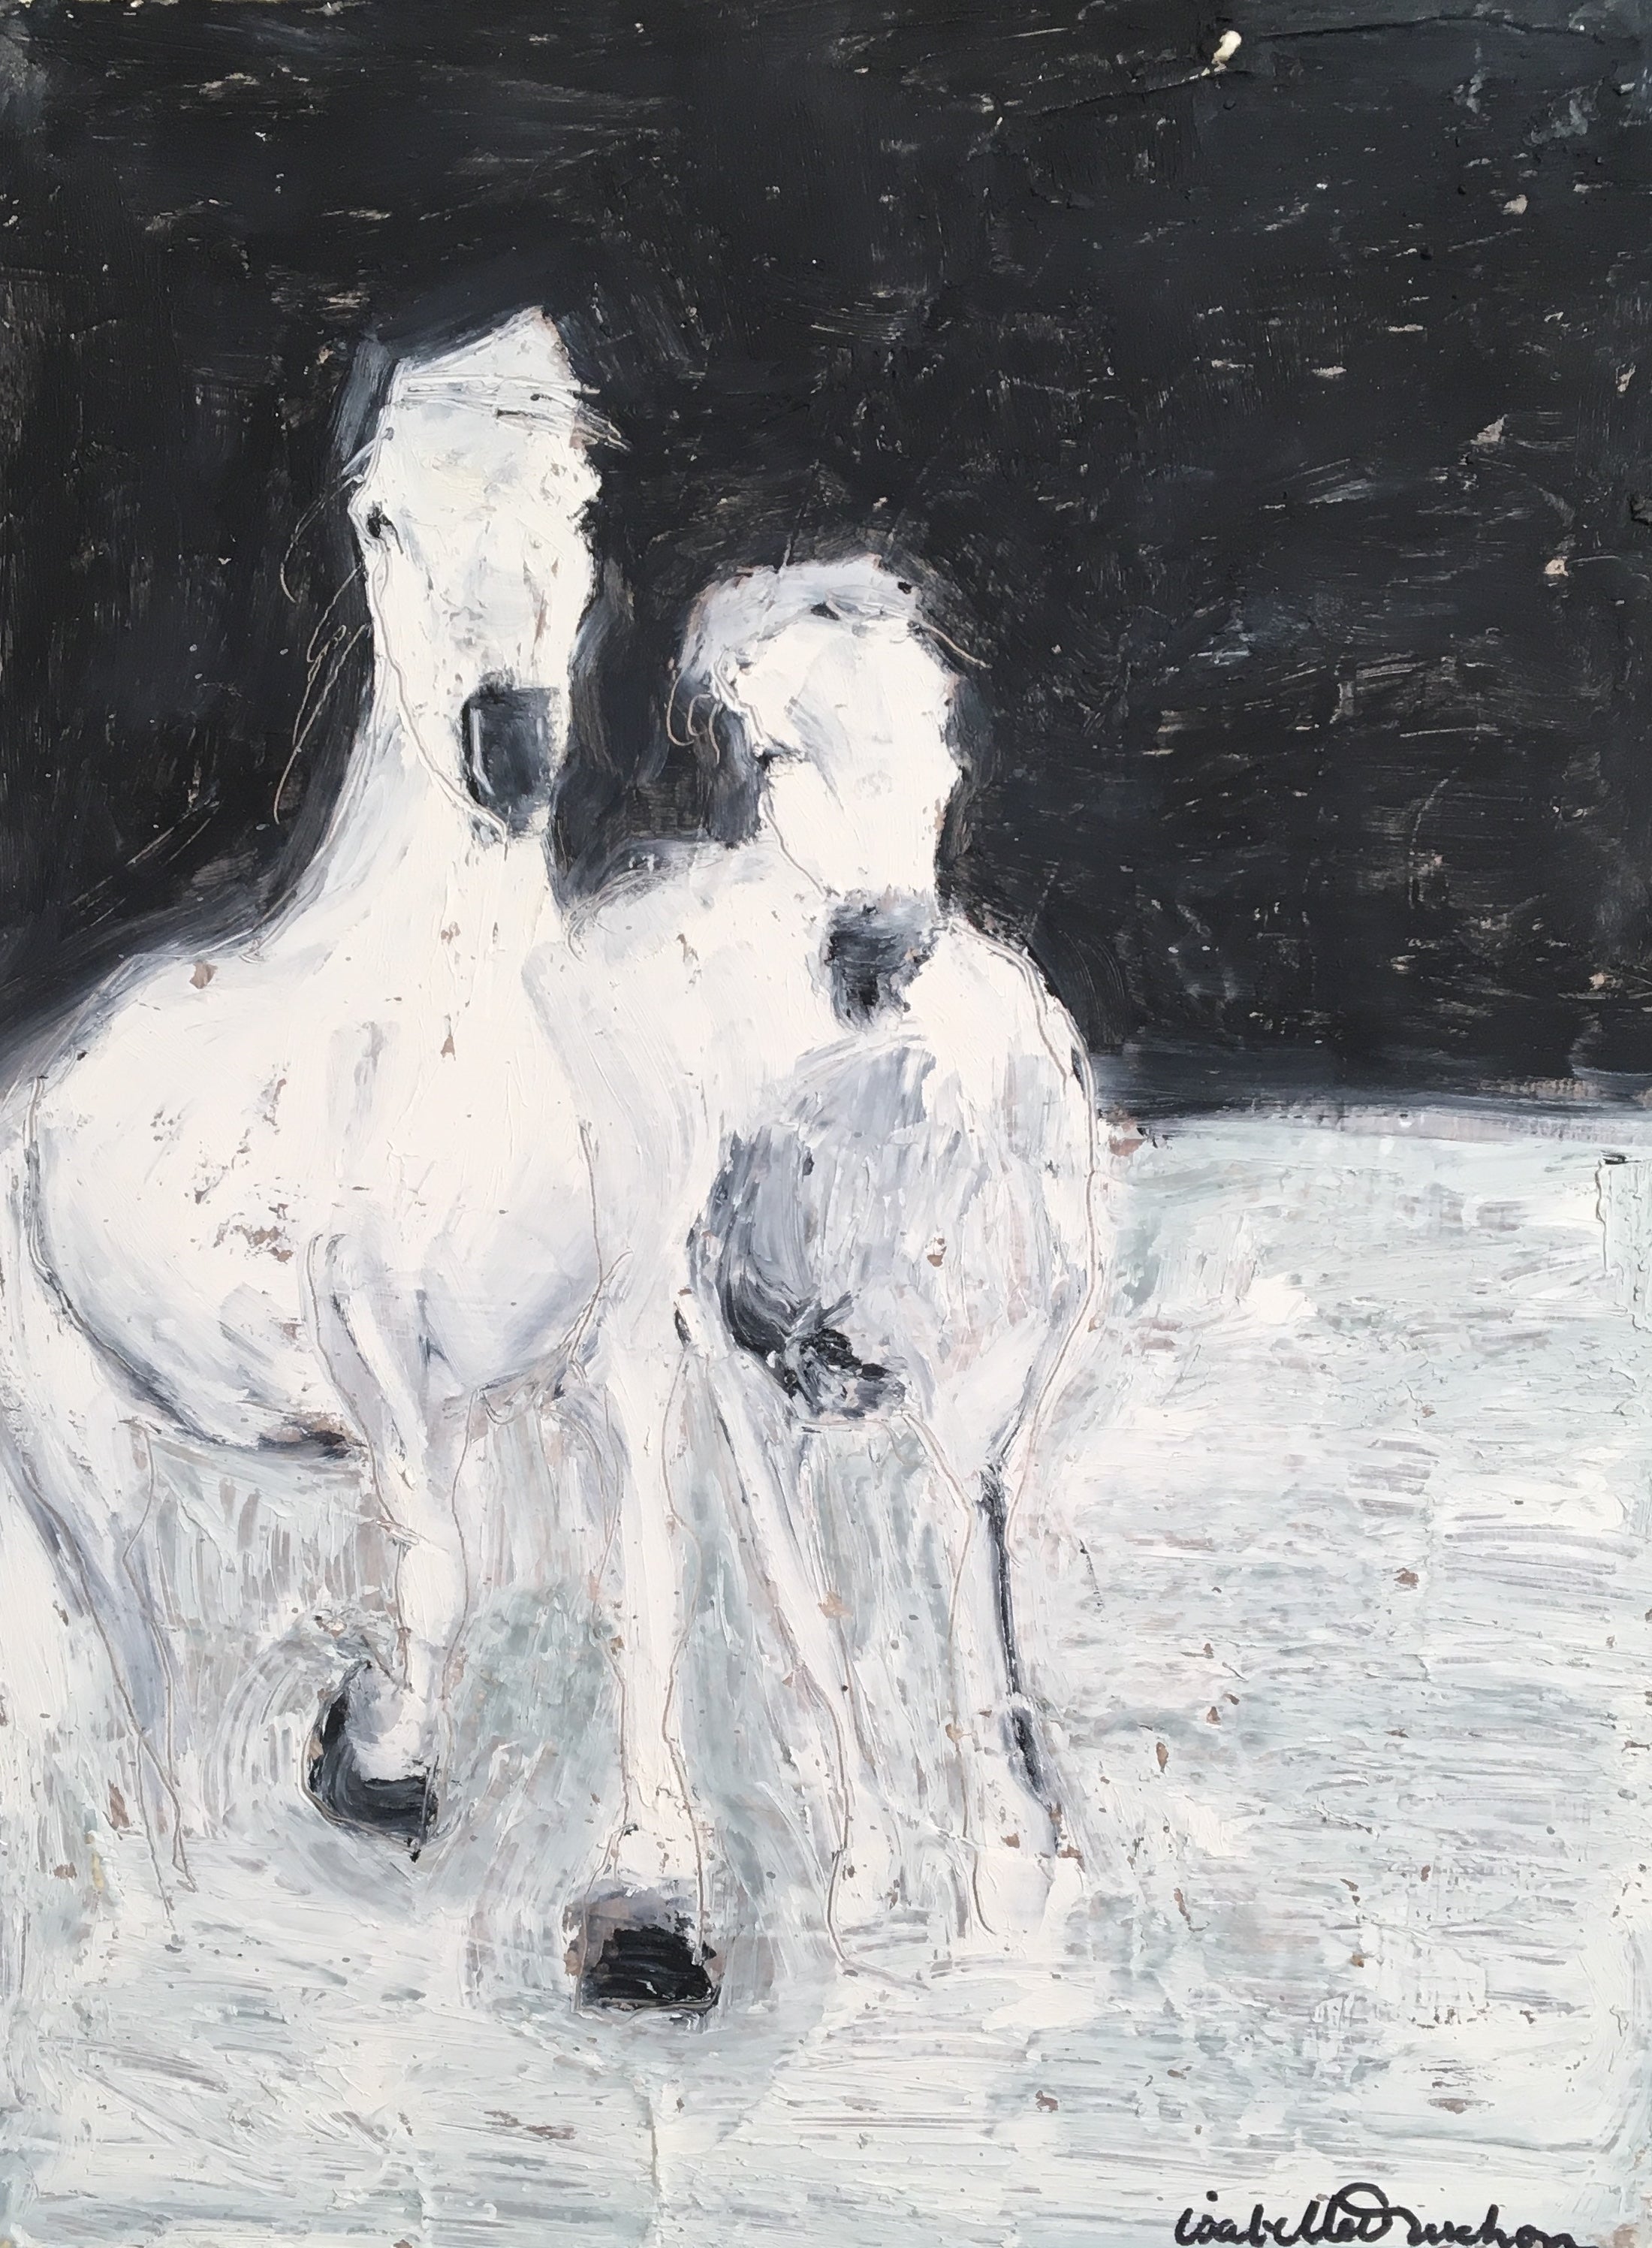 Inspired by the beautiful white horses of the Camargue, this highly textured oil original exudes energy in abstraction of the horse form as they gallop in the waters of the Rhone delta. Second in a series of three.